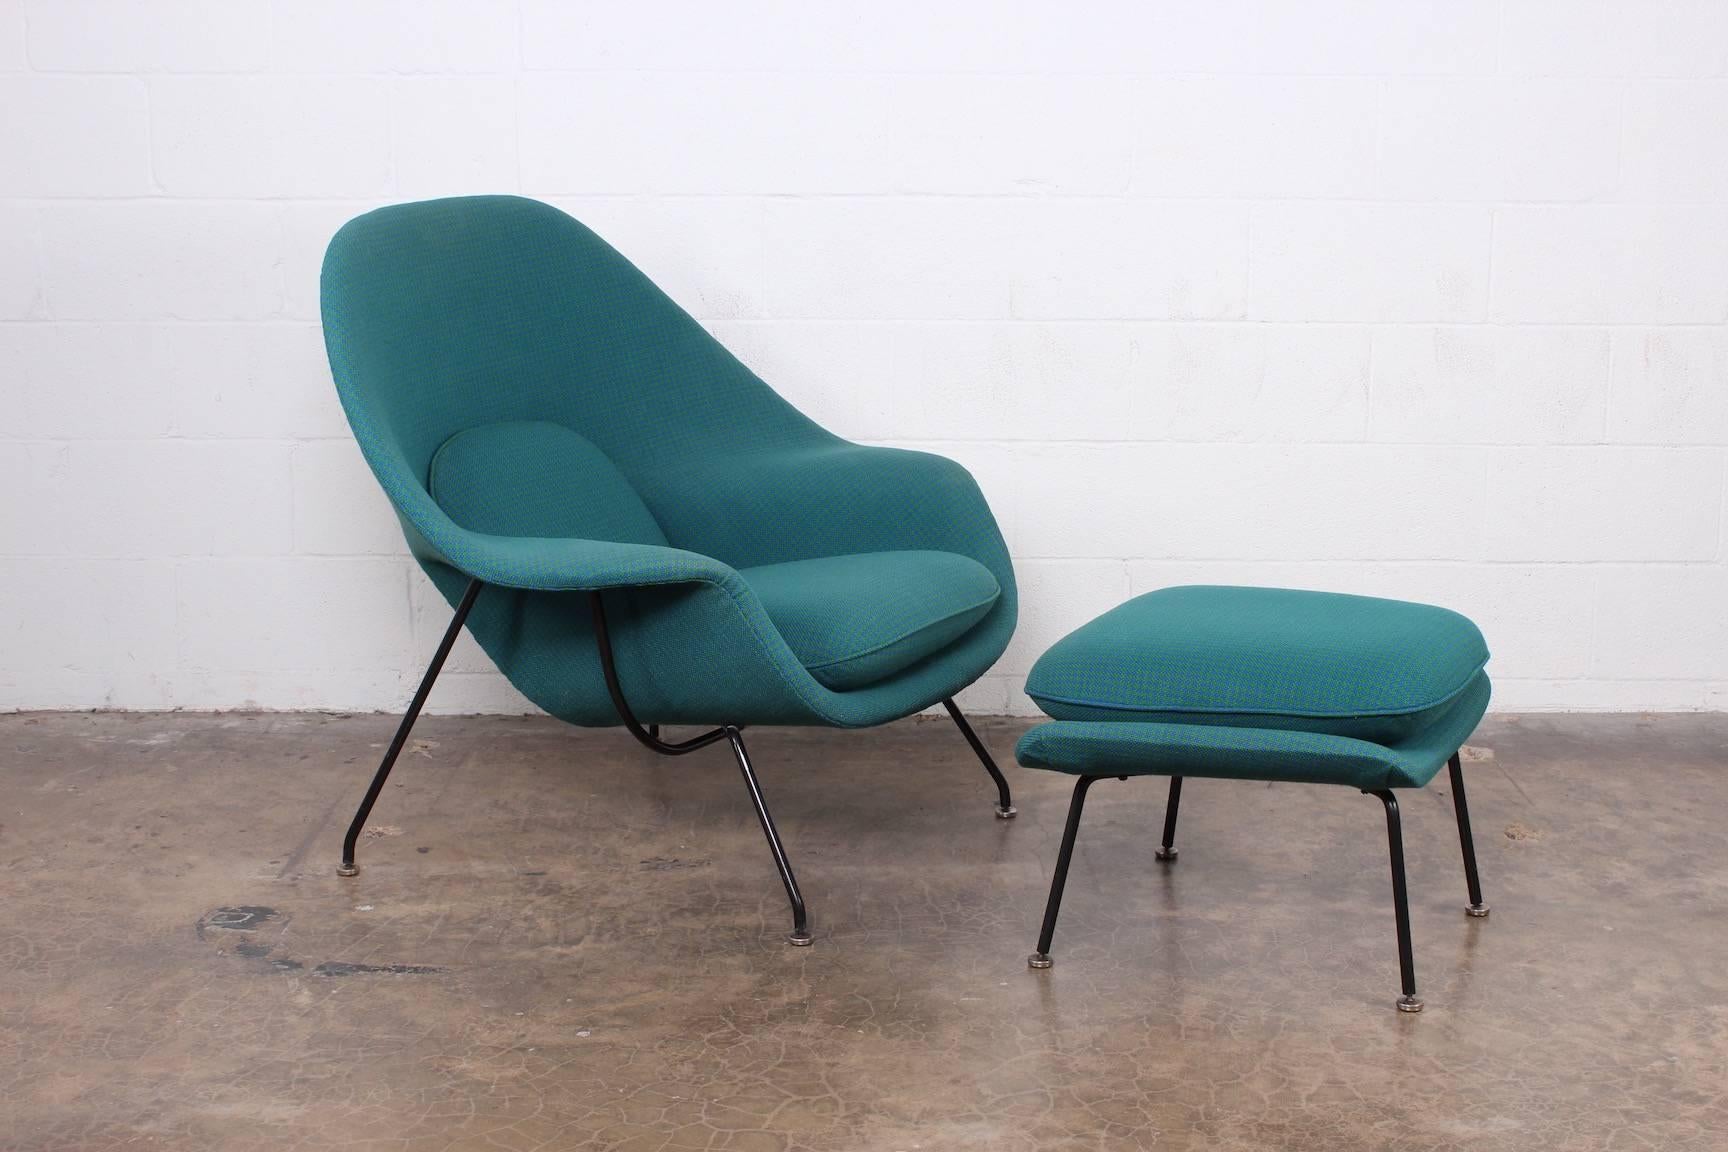 An early, all original Womb chair and ottoman designed by Eero Saarinen for Knoll.